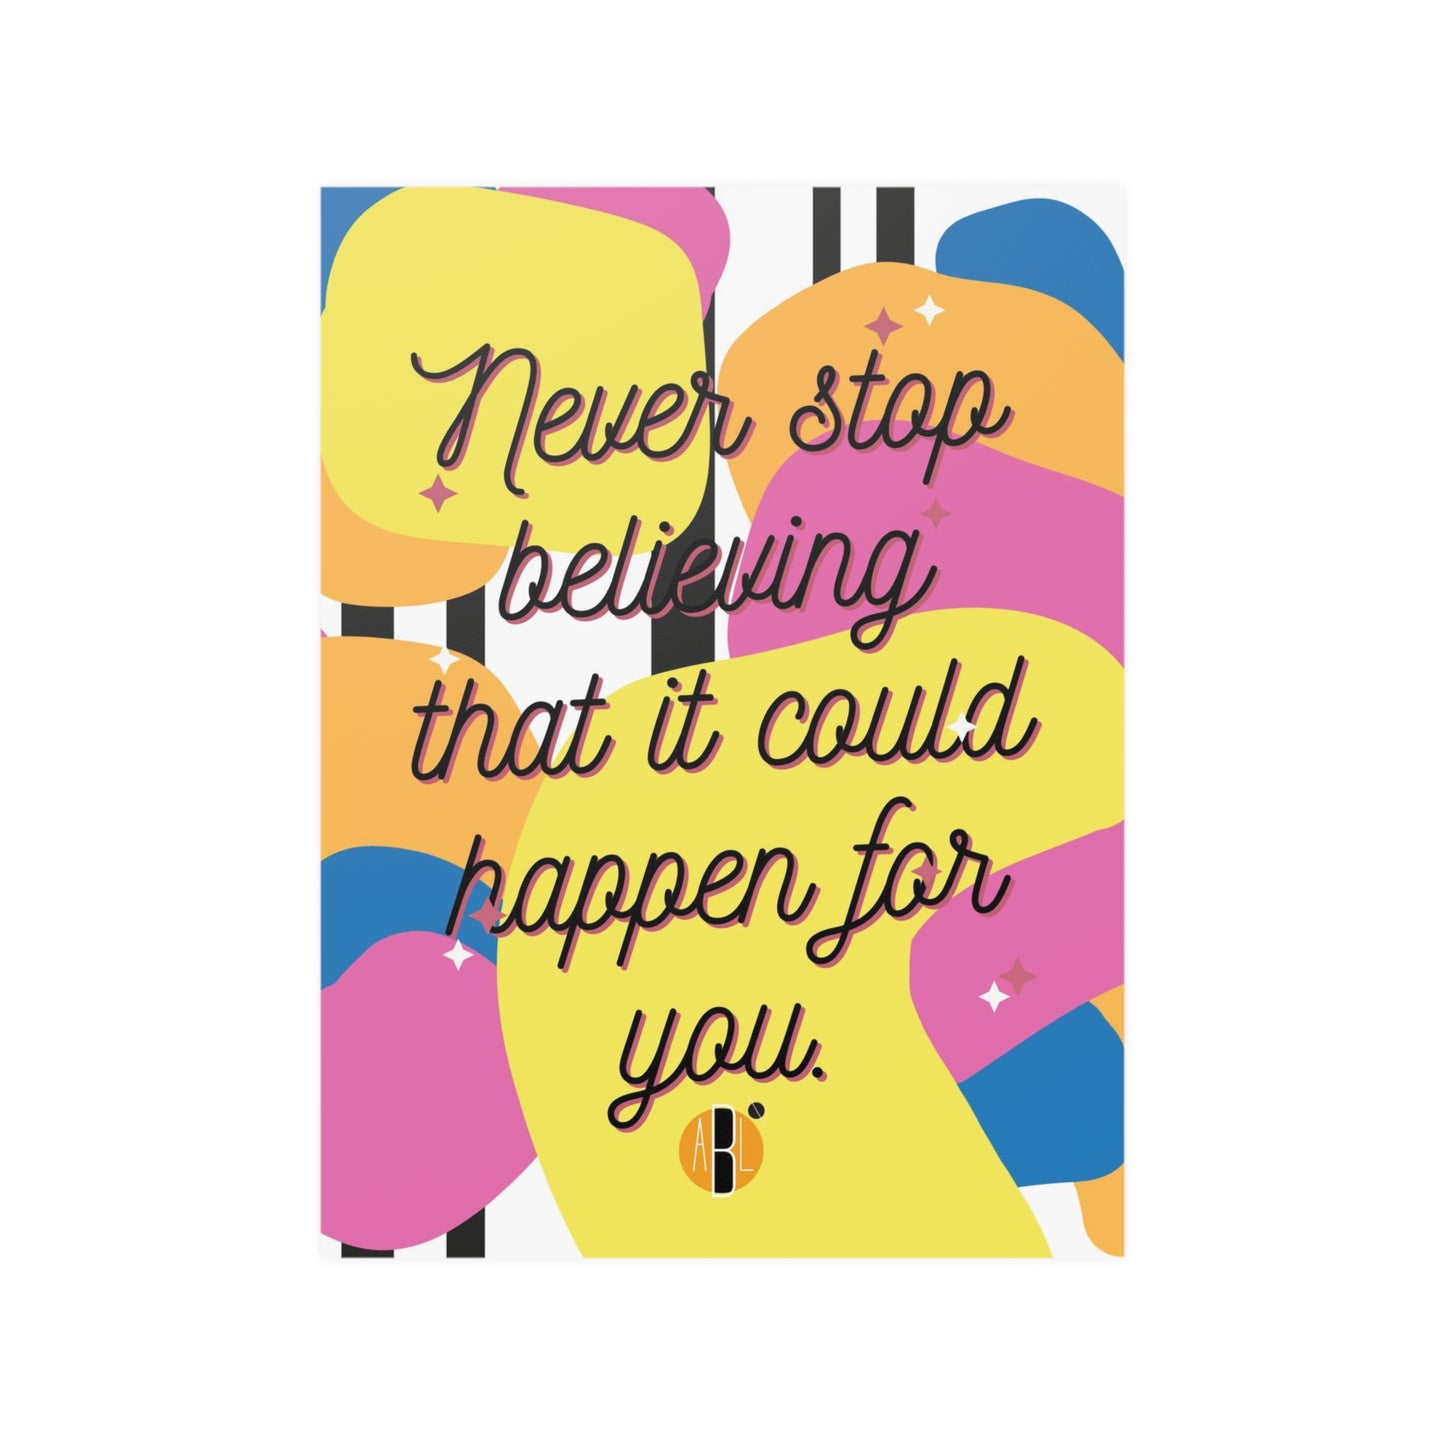 ABL Inspirational Poster: " Never stop believing ..."